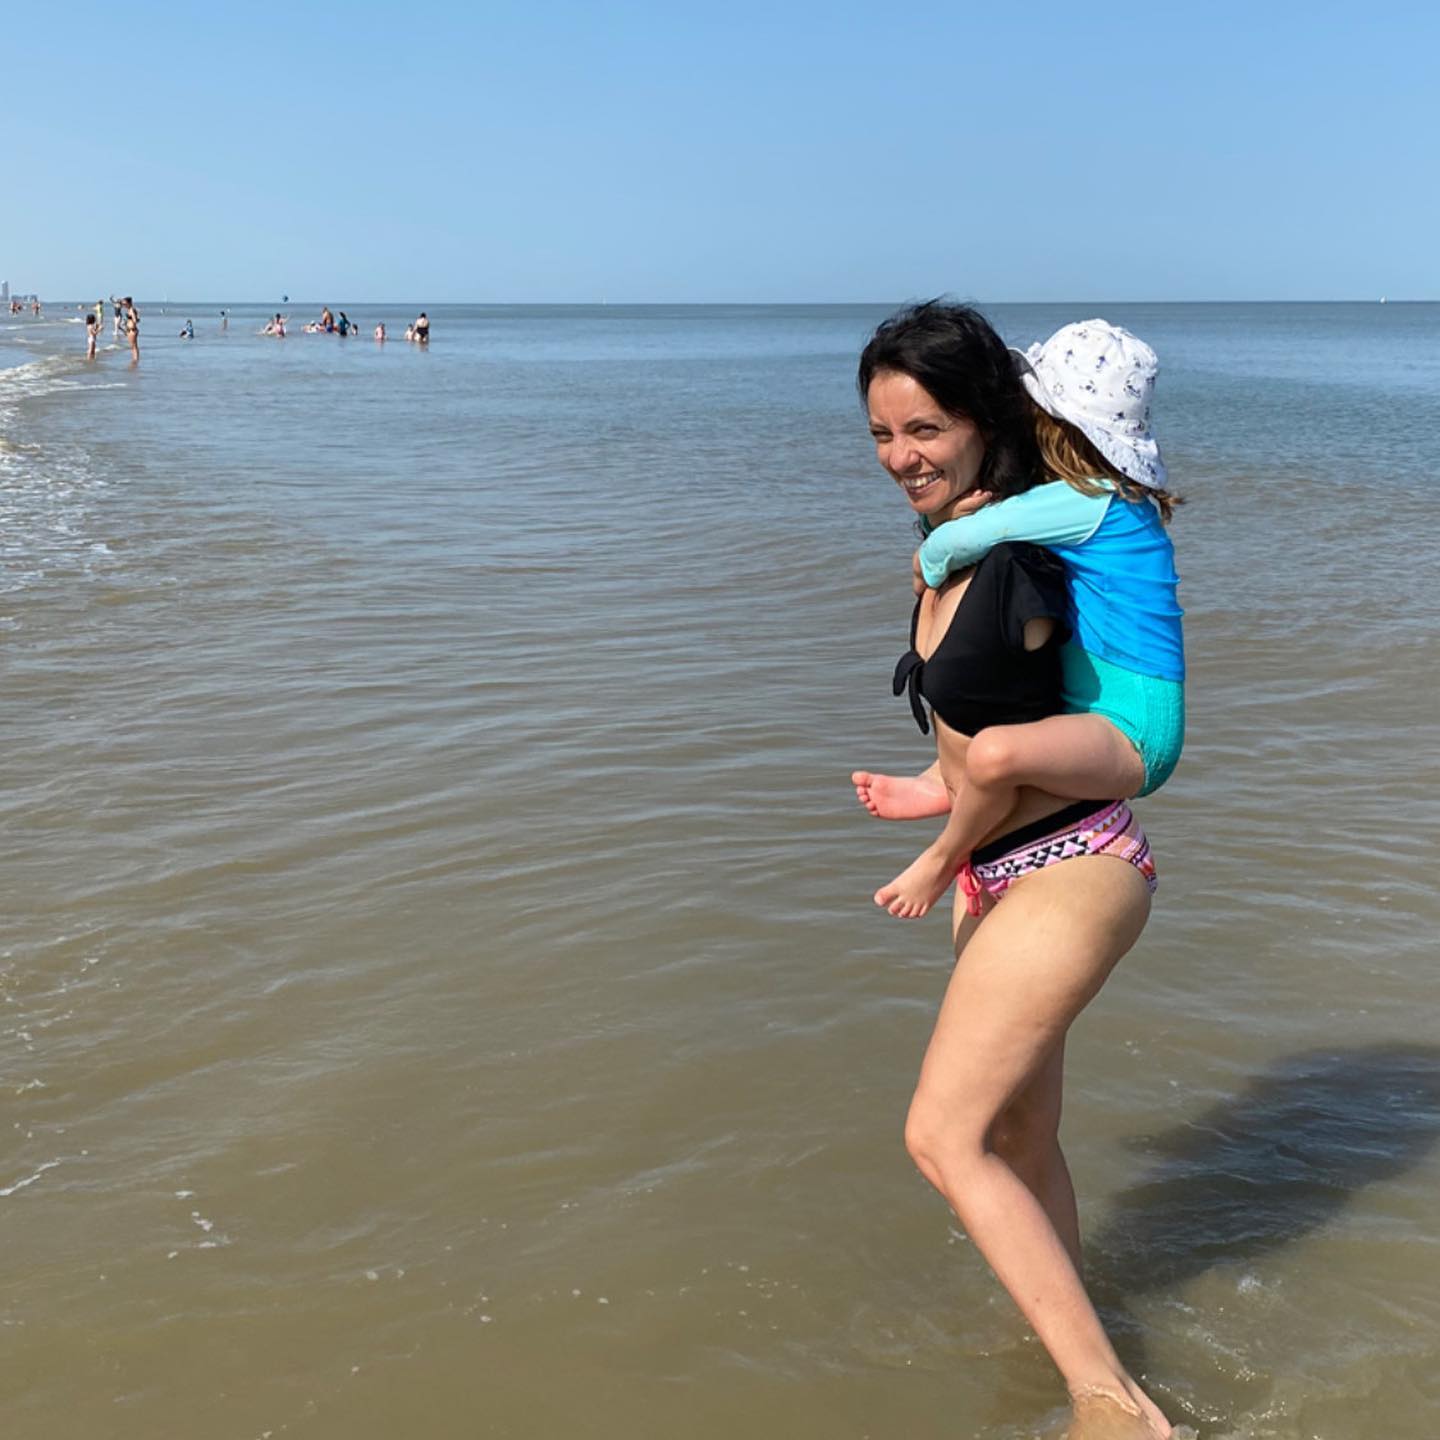 Sarah Talbi carries her daughter Lilia on her back at the beach.